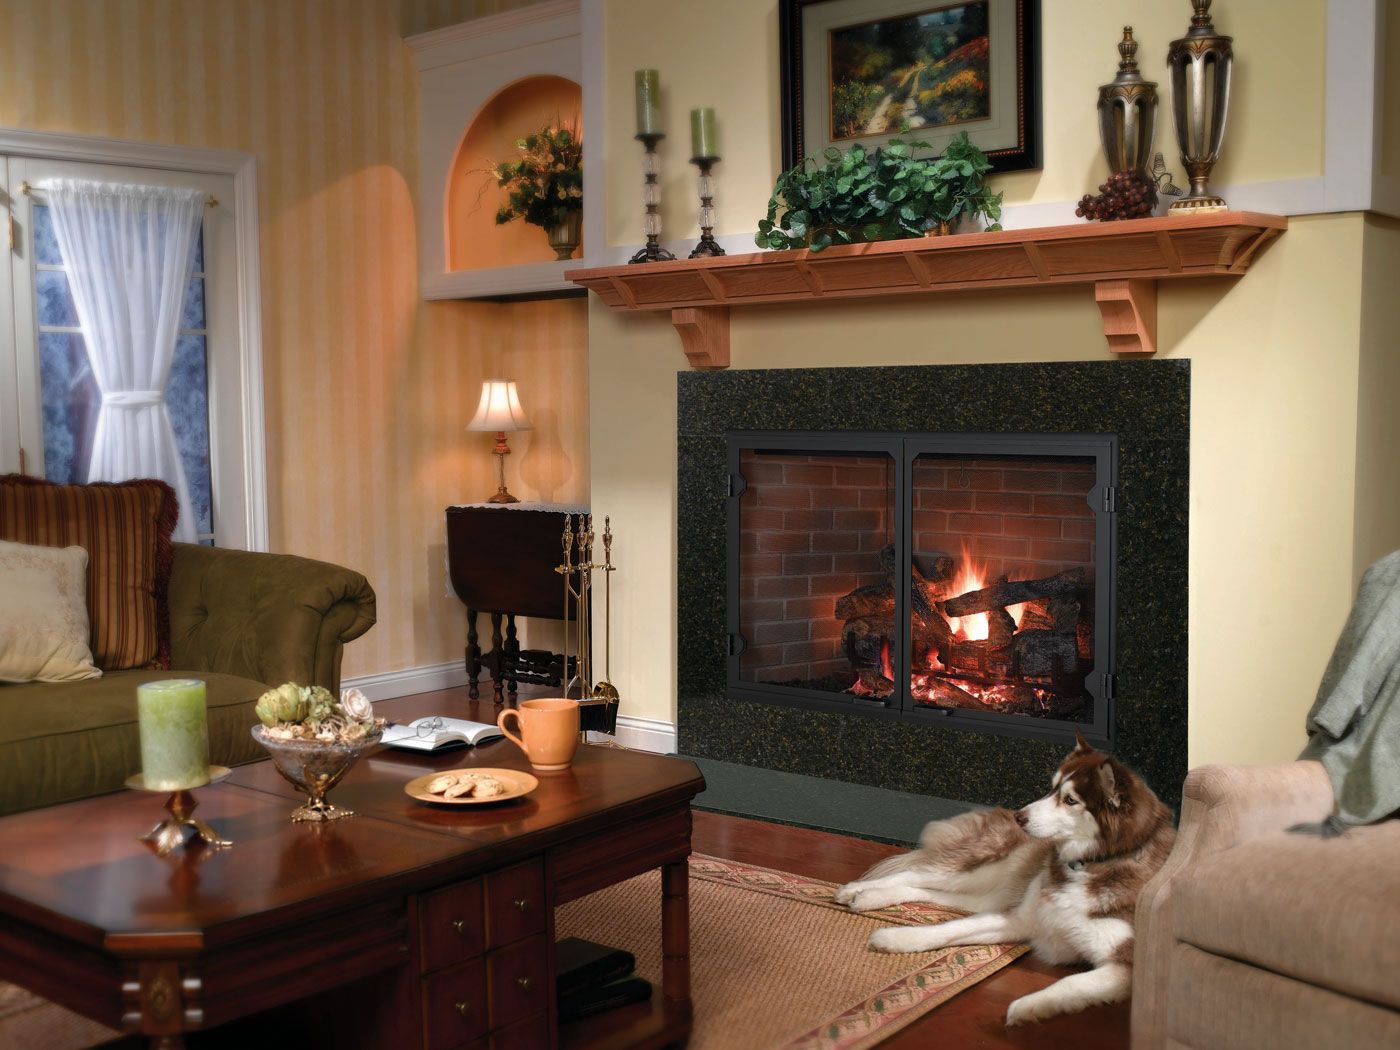 Archgard Fireplace Best Of 51 Best Wood Burning Stove Fireplaces Images